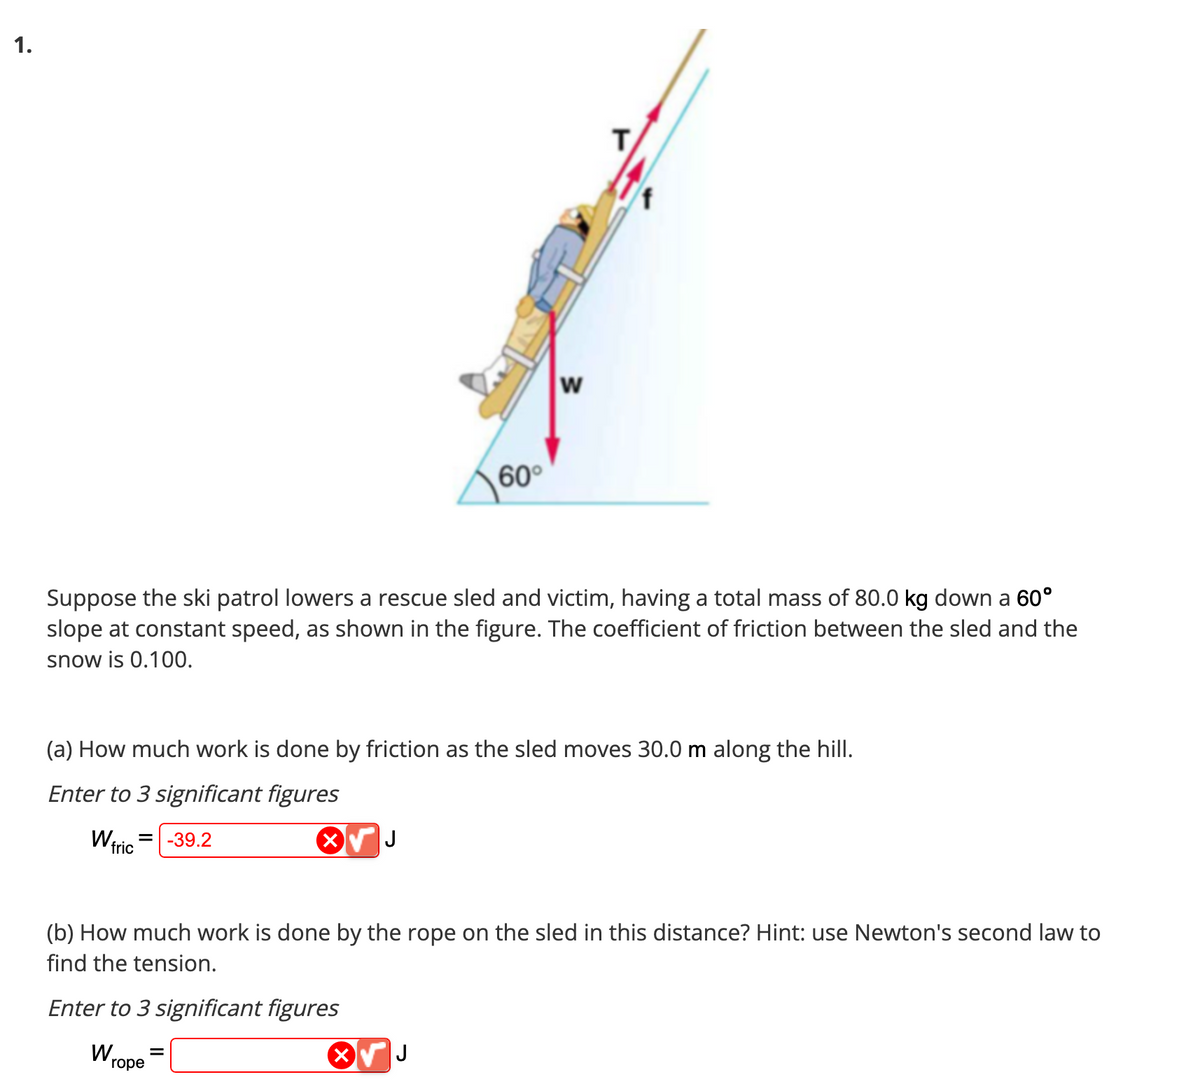 1.
fric
Suppose the ski patrol lowers a rescue sled and victim, having a total mass of 80.0 kg down a 60°
slope at constant speed, as shown in the figure. The coefficient of friction between the sled and the
snow is 0.100.
(a) How much work is done by friction as the sled moves 30.0 m along the hill.
Enter to 3 significant figures
= -39.2
X
Wrope
60°
J
=
W
T
(b) How much work is done by the rope on the sled in this distance? Hint: use Newton's second law to
find the tension.
Enter to 3 significant figures
X√ J